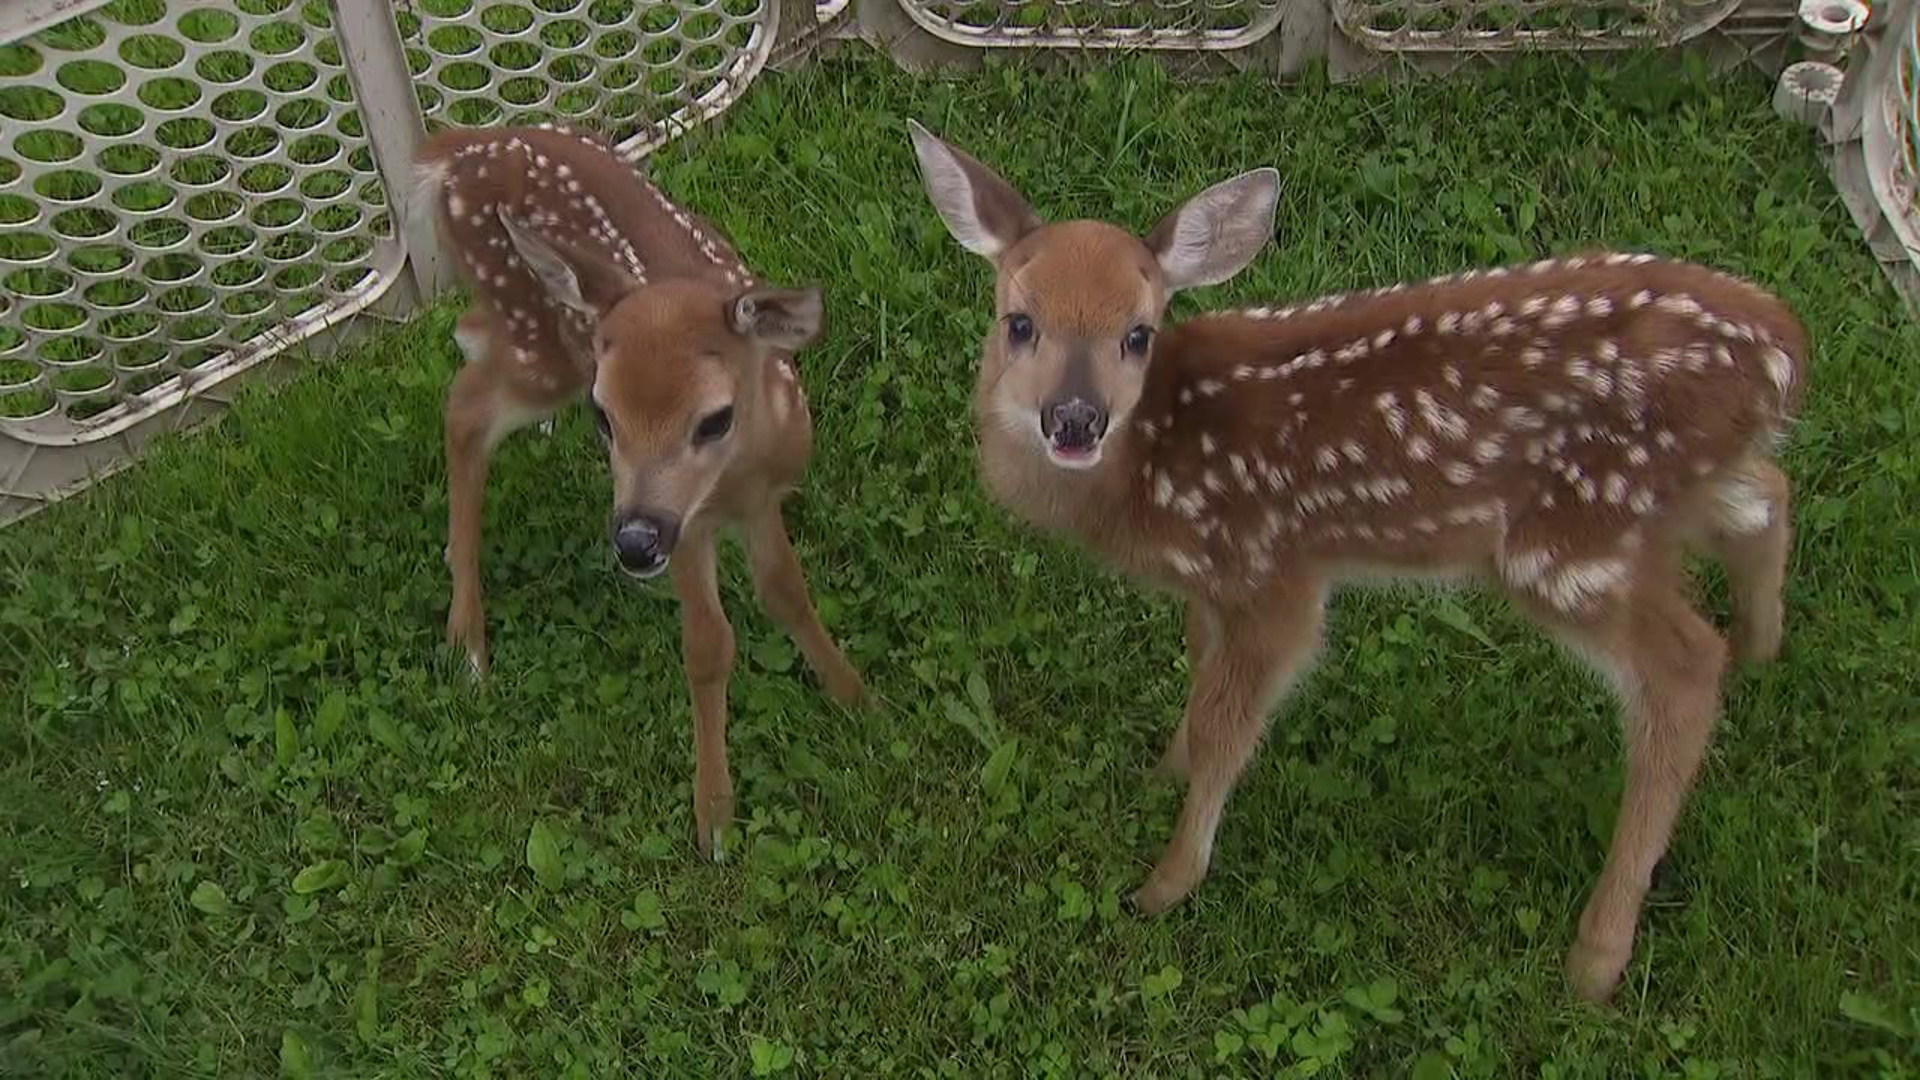 Newswatch 16's Emily Kress spoke with wildlife experts in the Poconos about what you need to know if you come across a fawn.